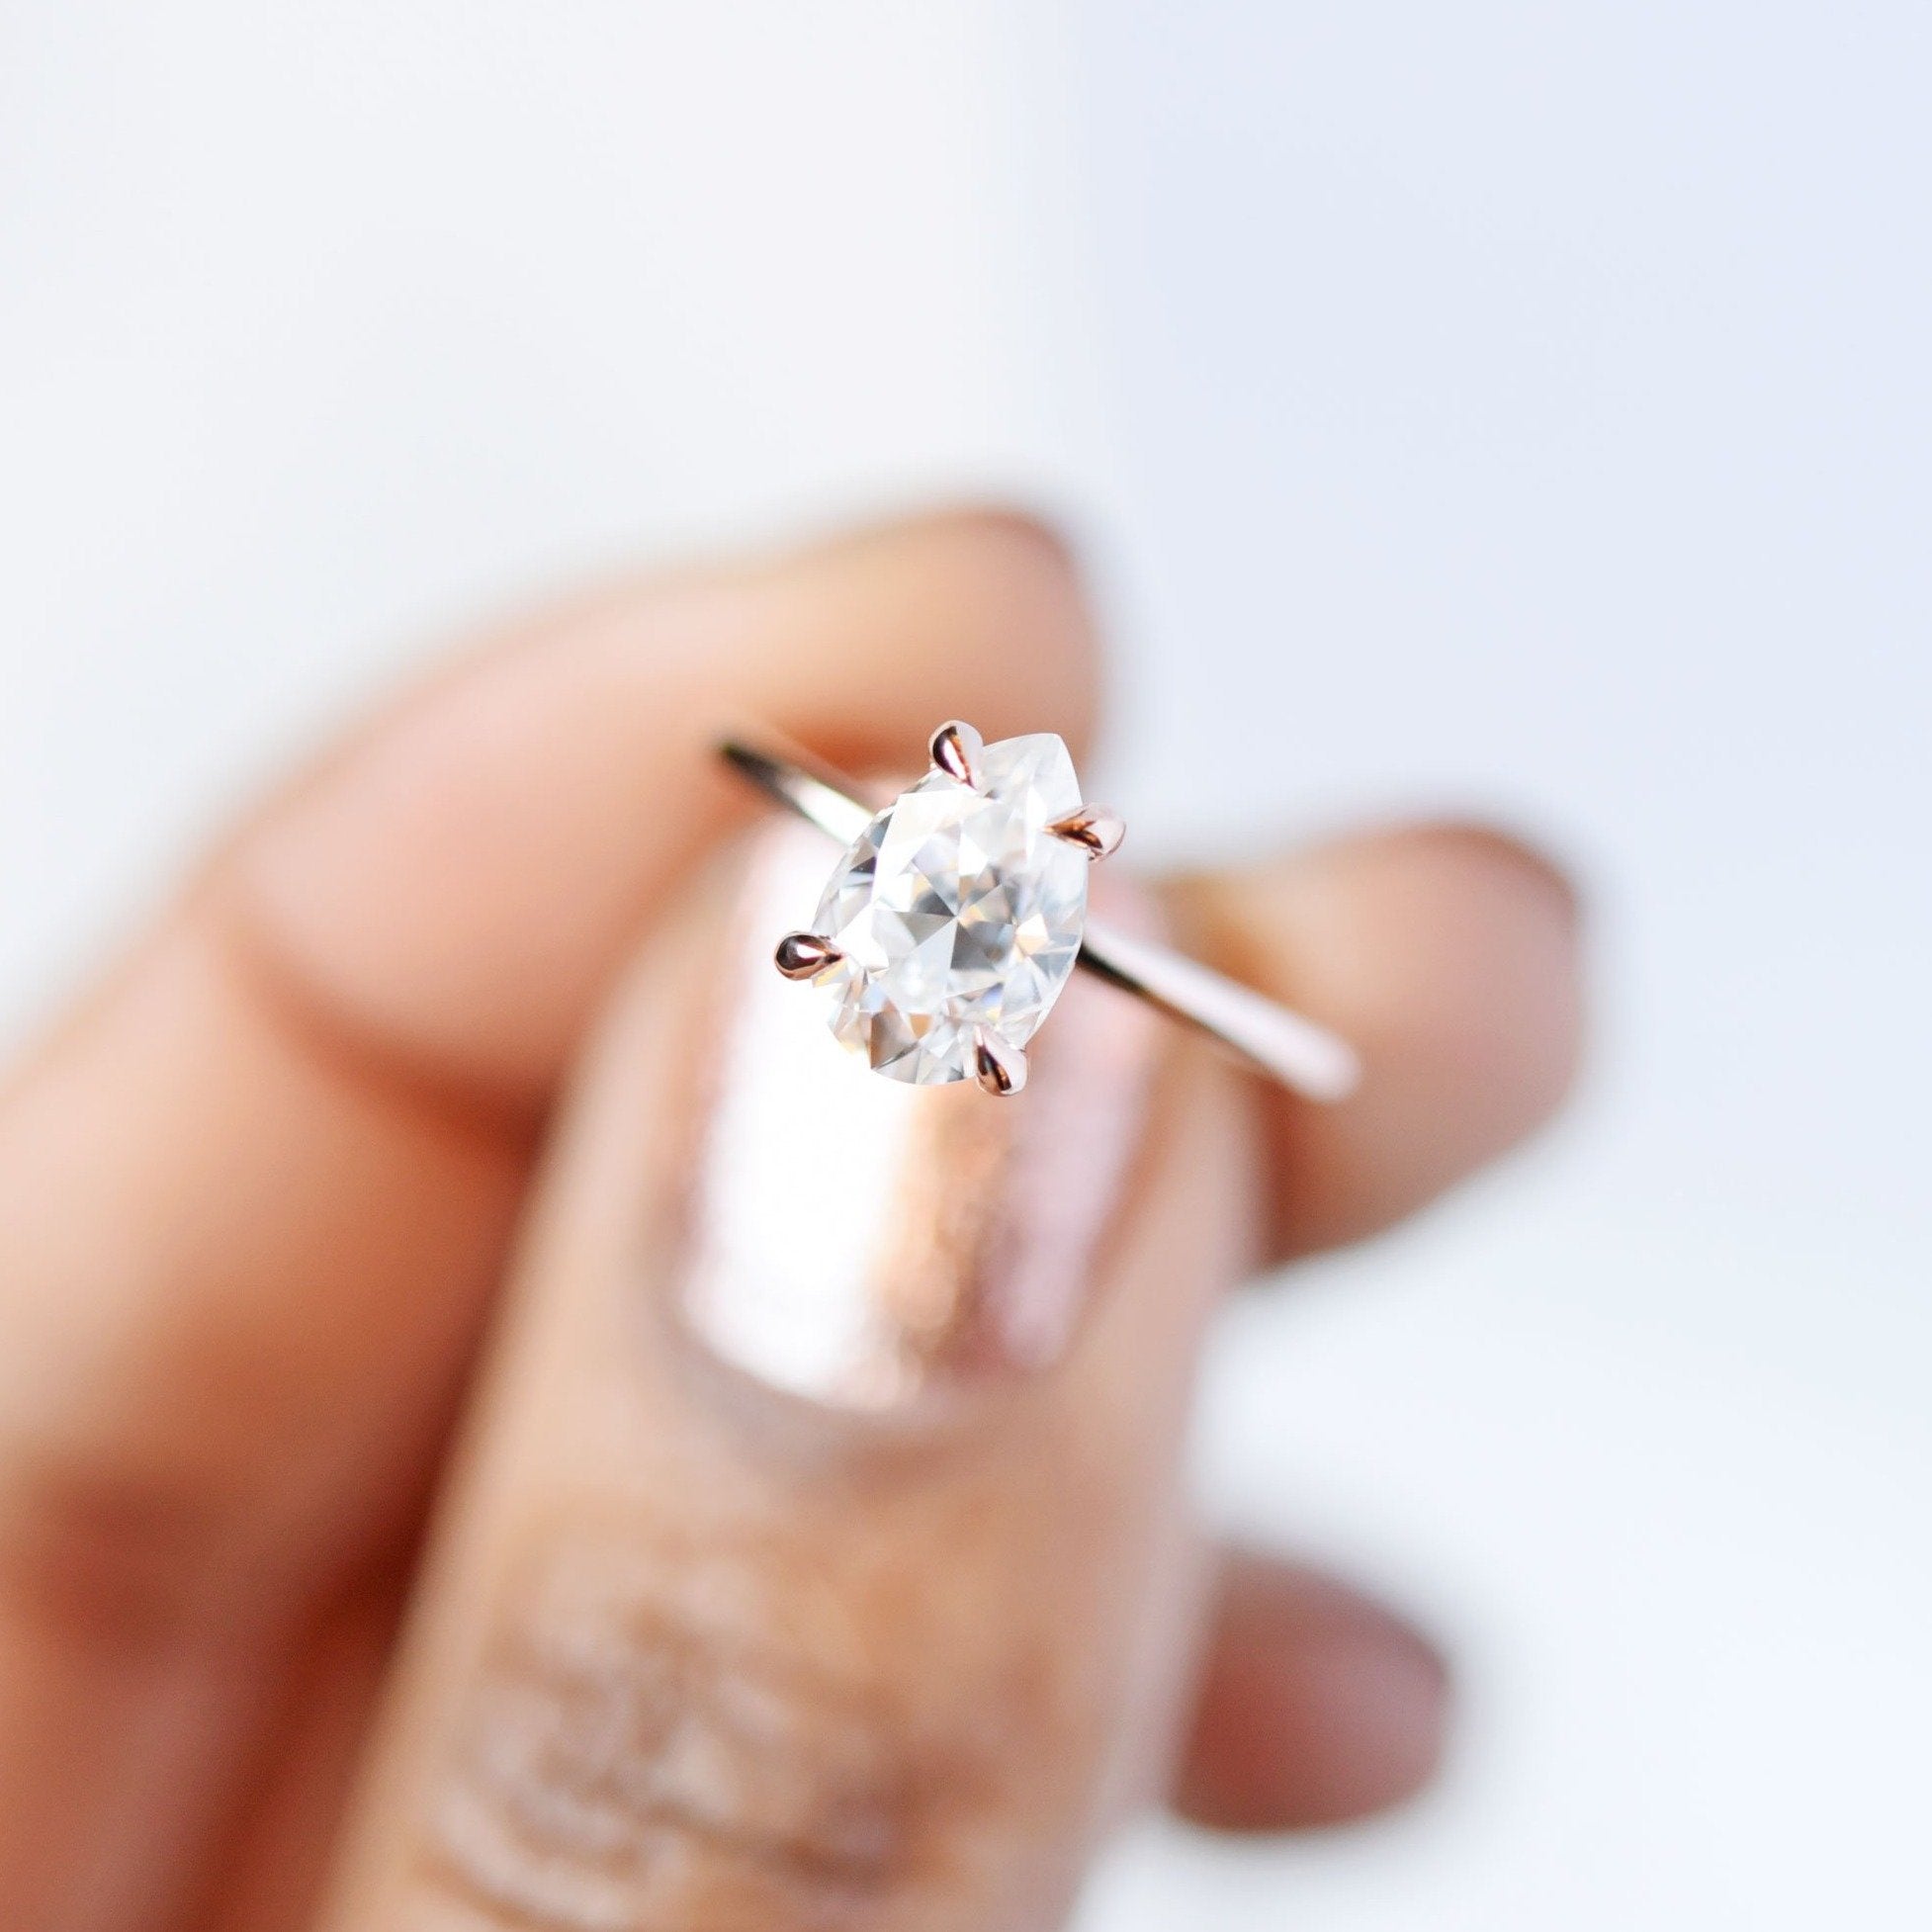 Vera Pear 1.5ct Moissanite Solitaire Engagement Ring held between fingers in an overhead view